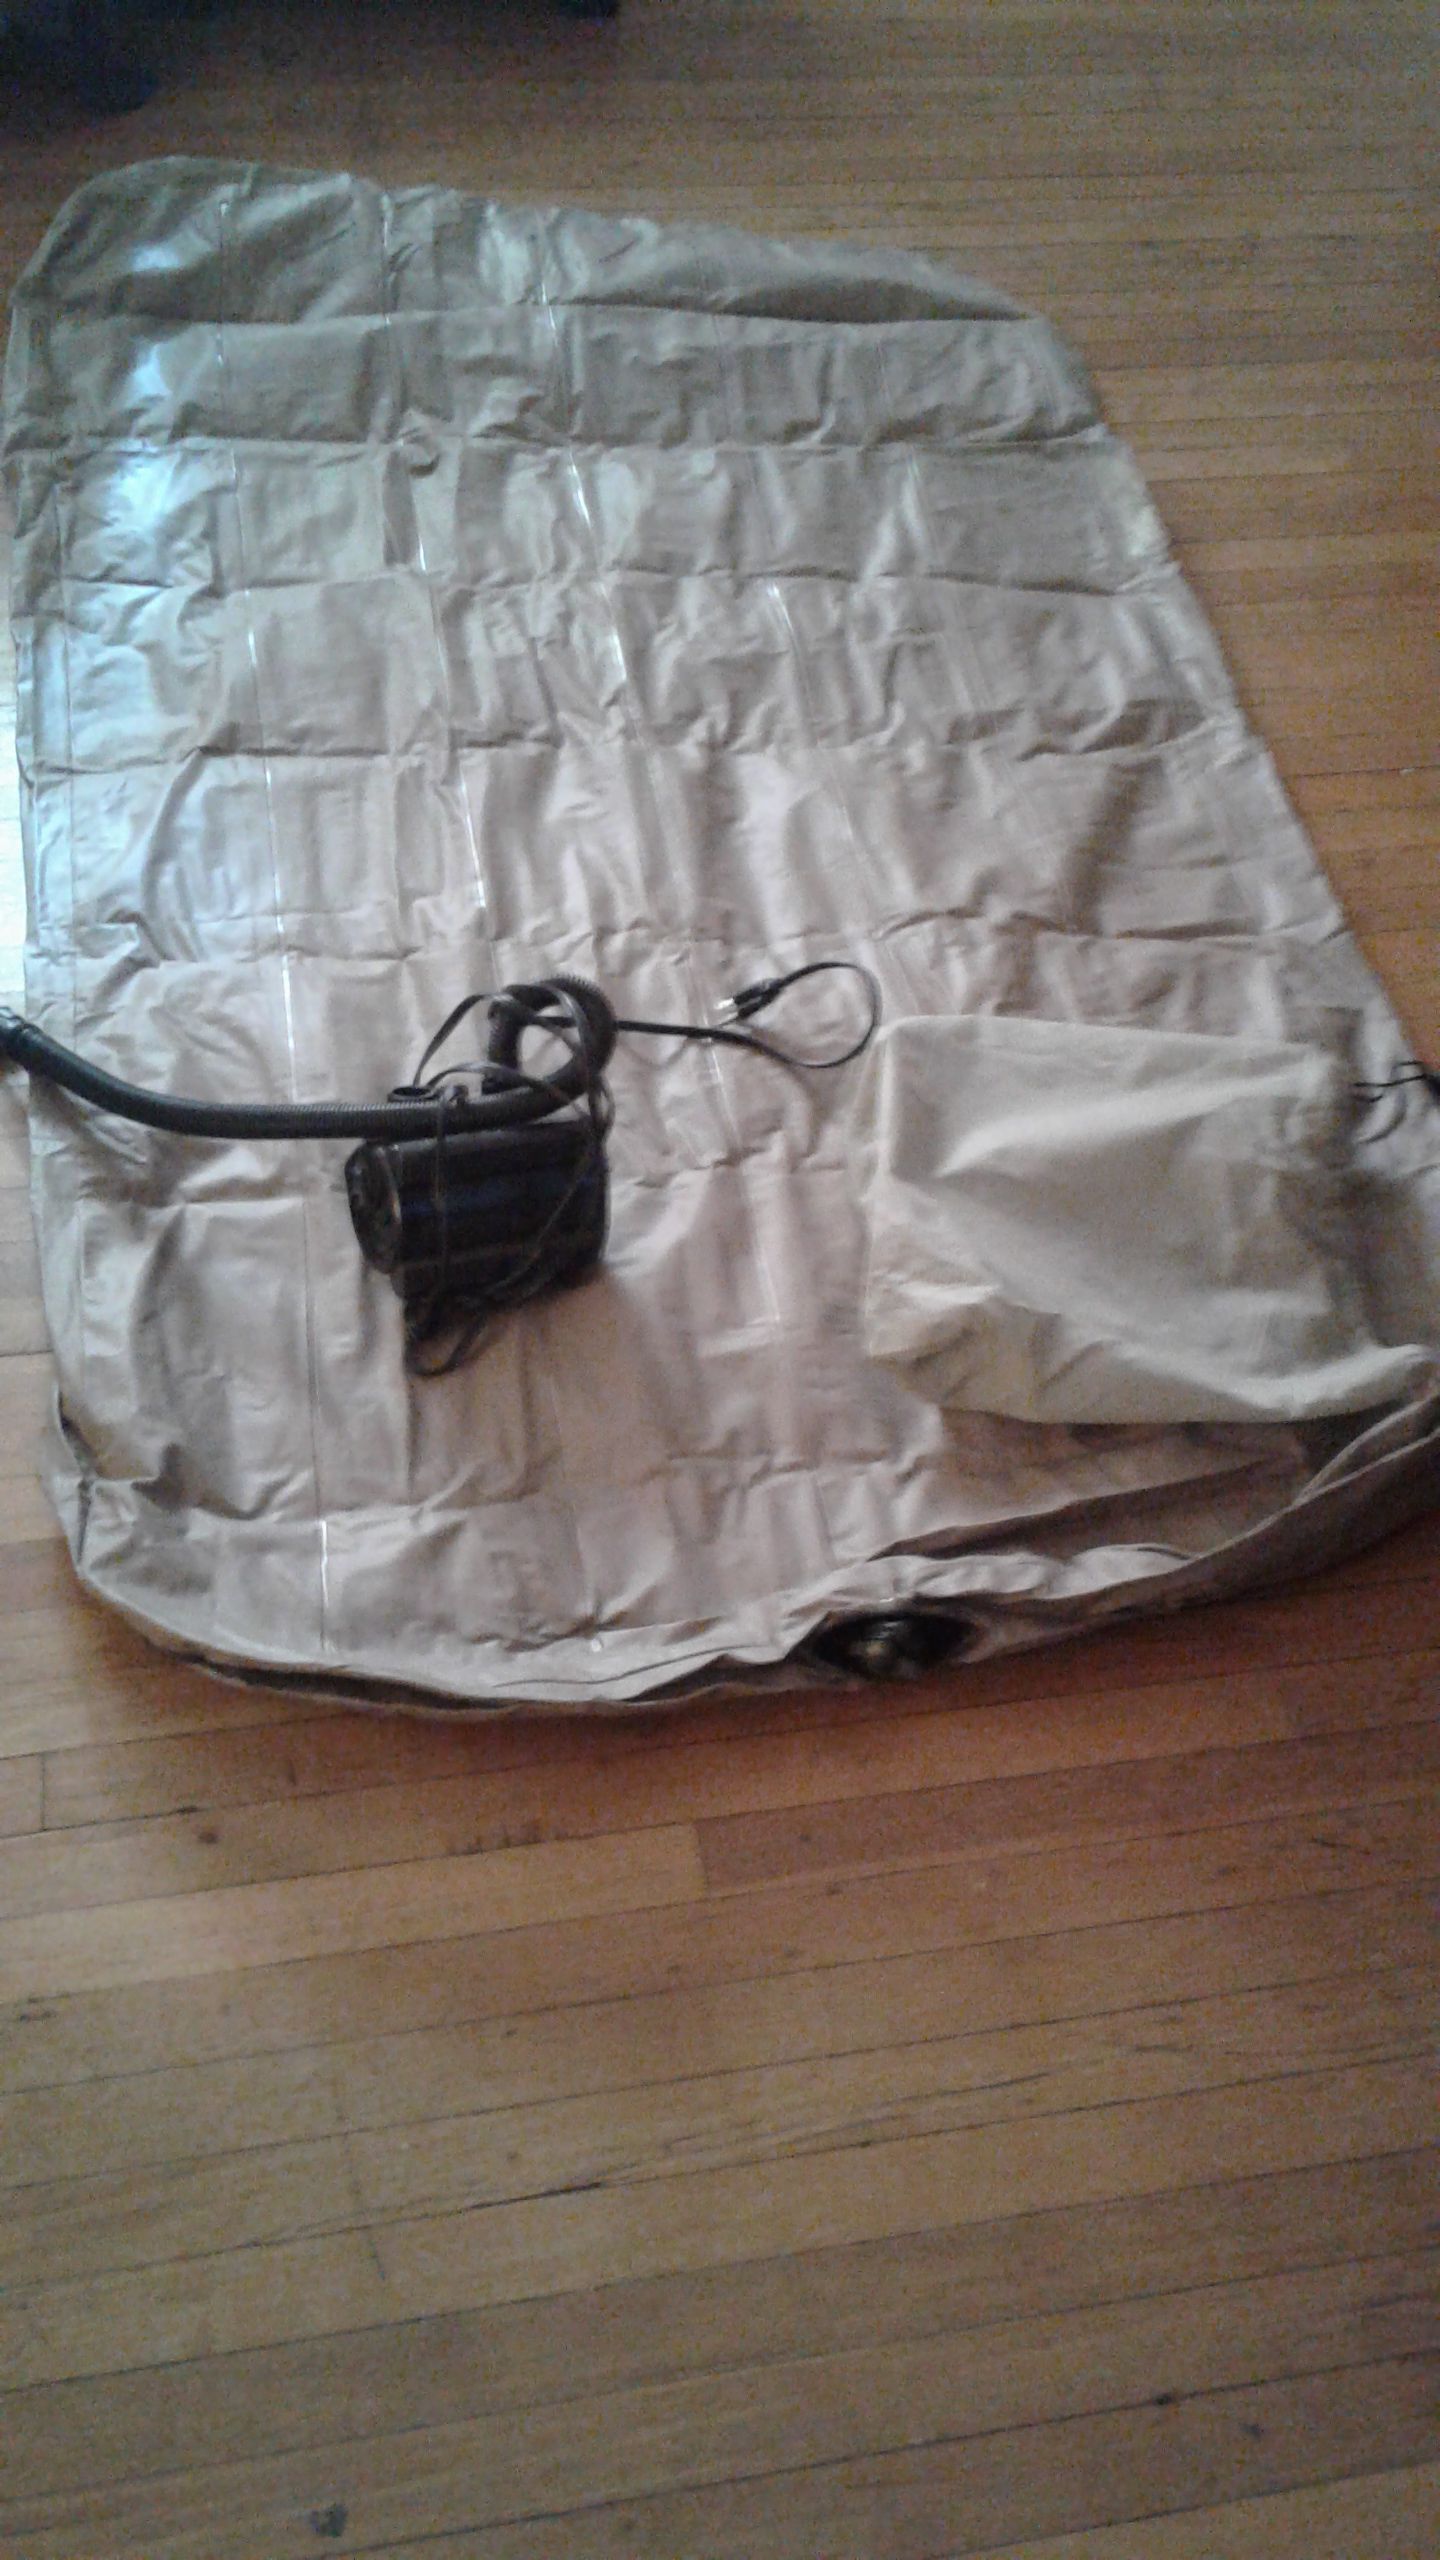 Ozark trail air mattress with pump and carrying bag